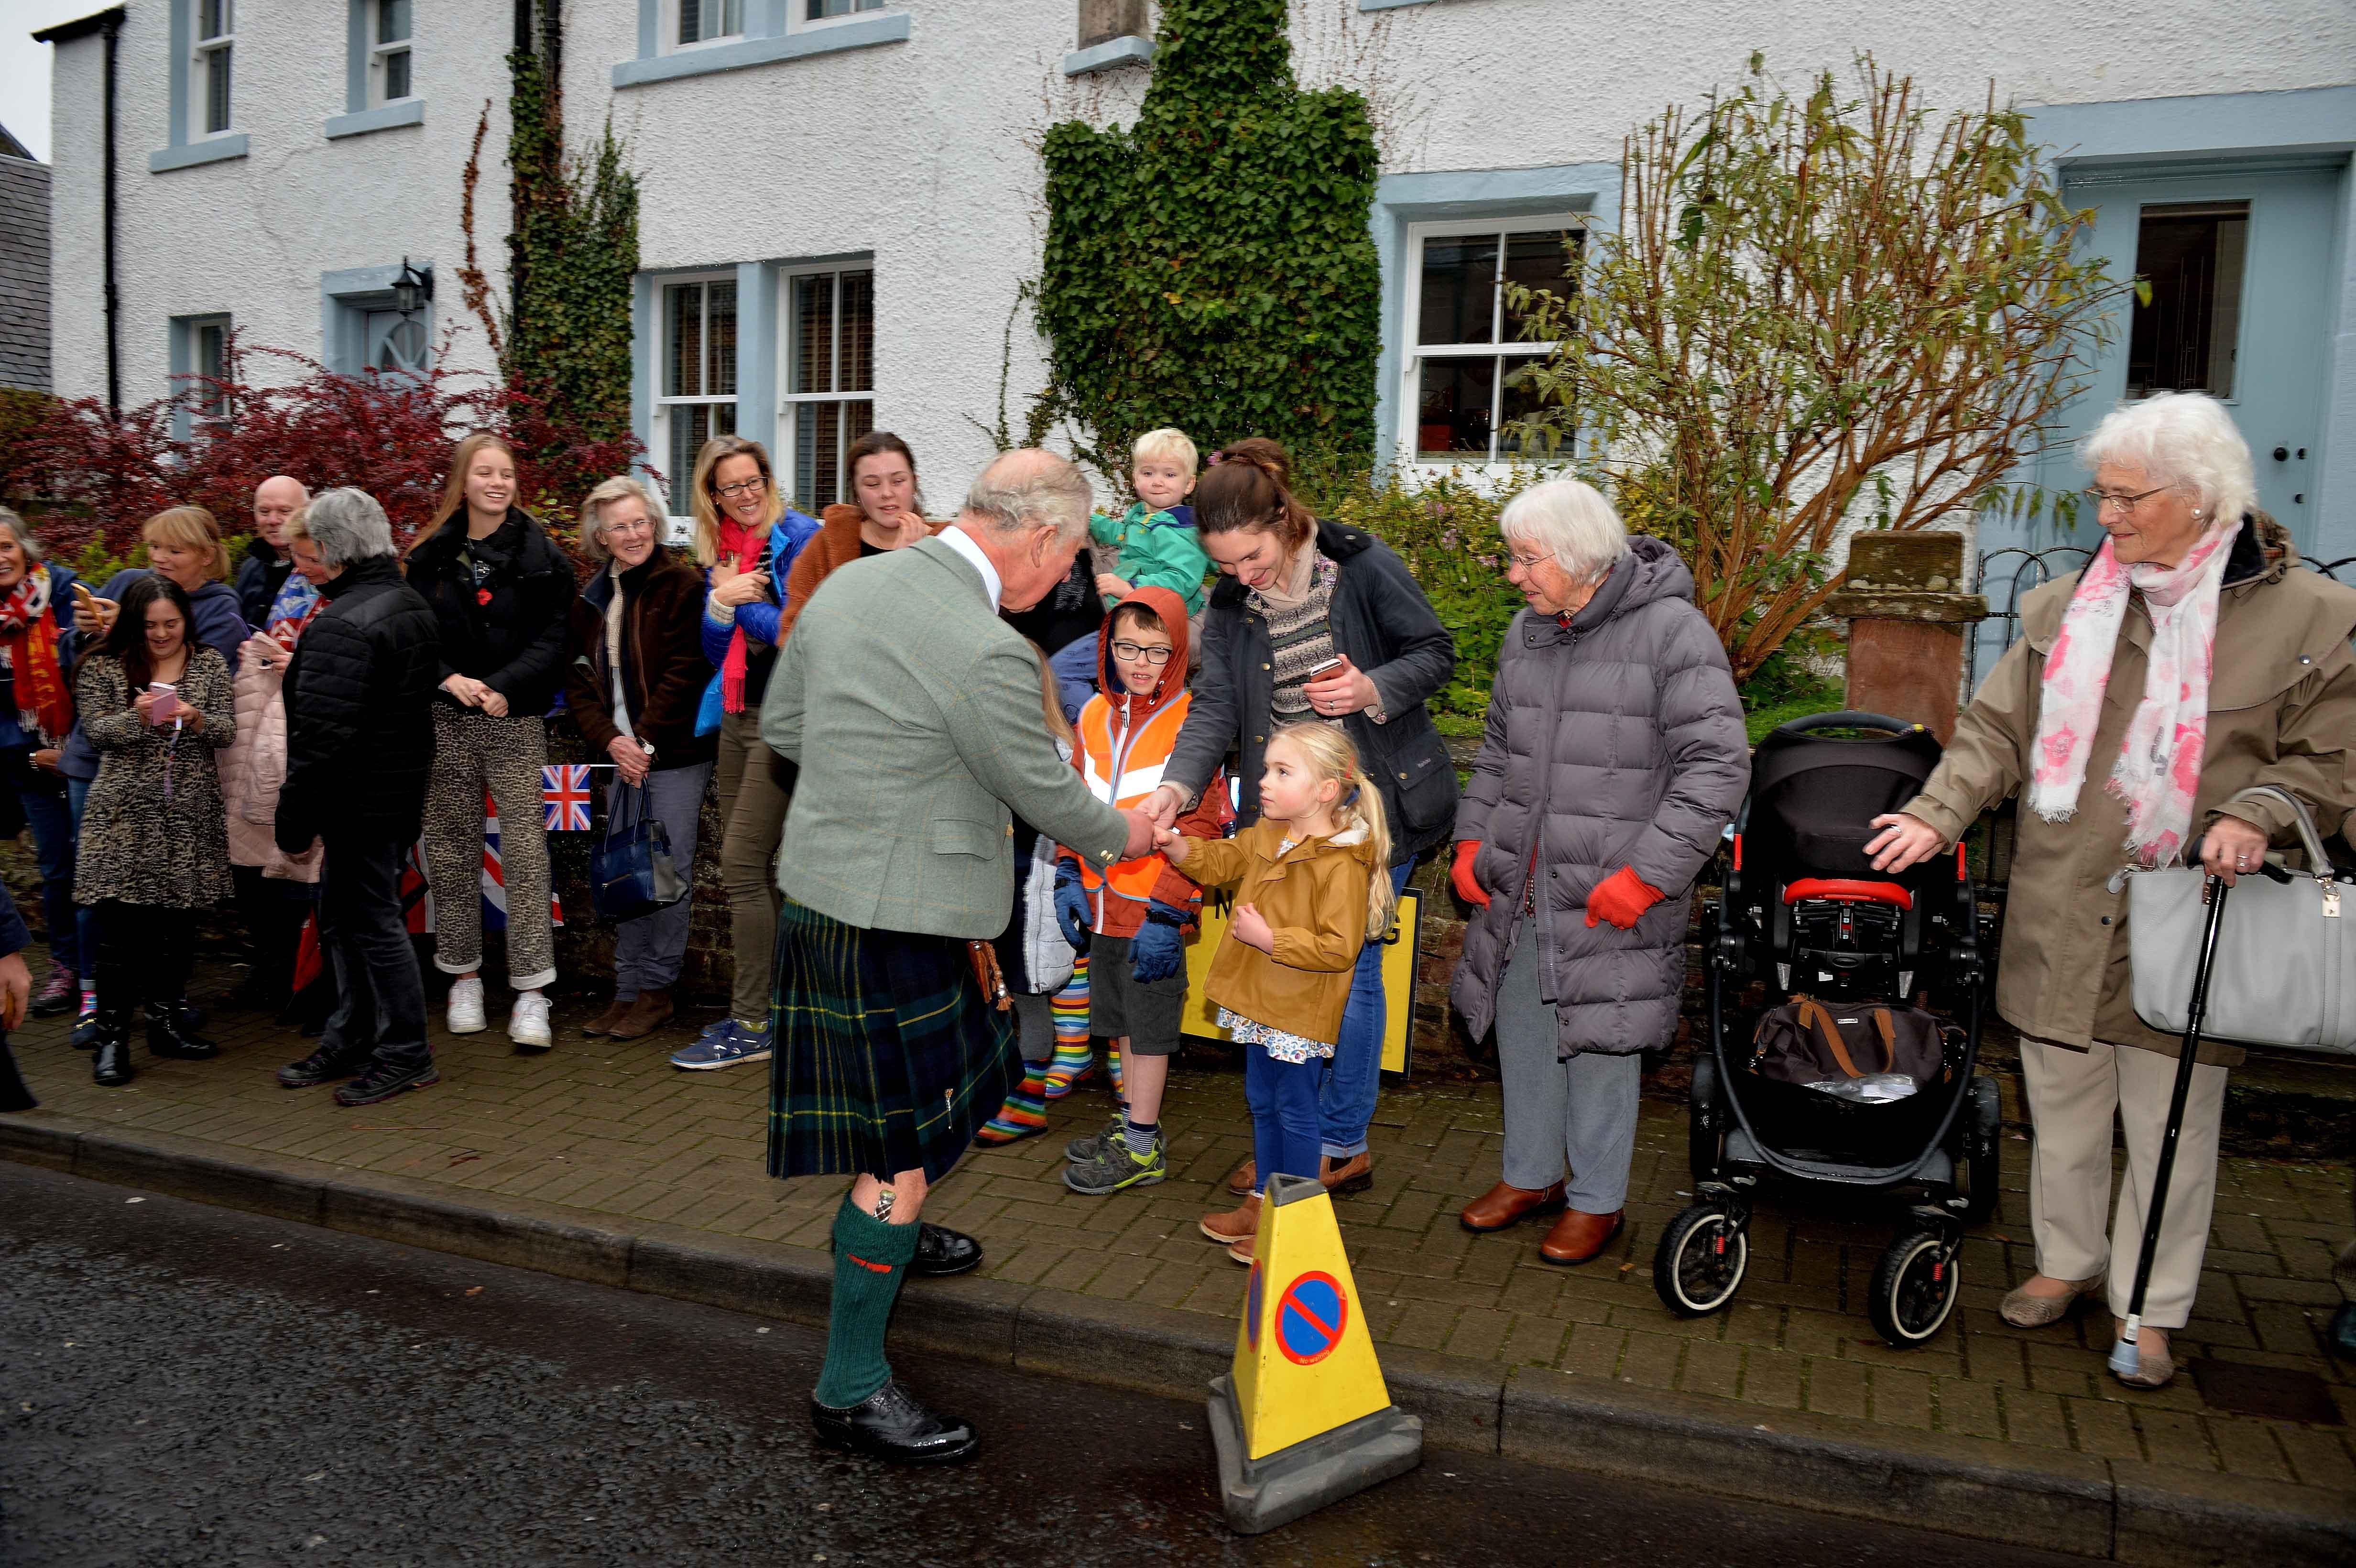 His Royal Highness the Duke of Rothesay meets delighted crowds in St Boswells.